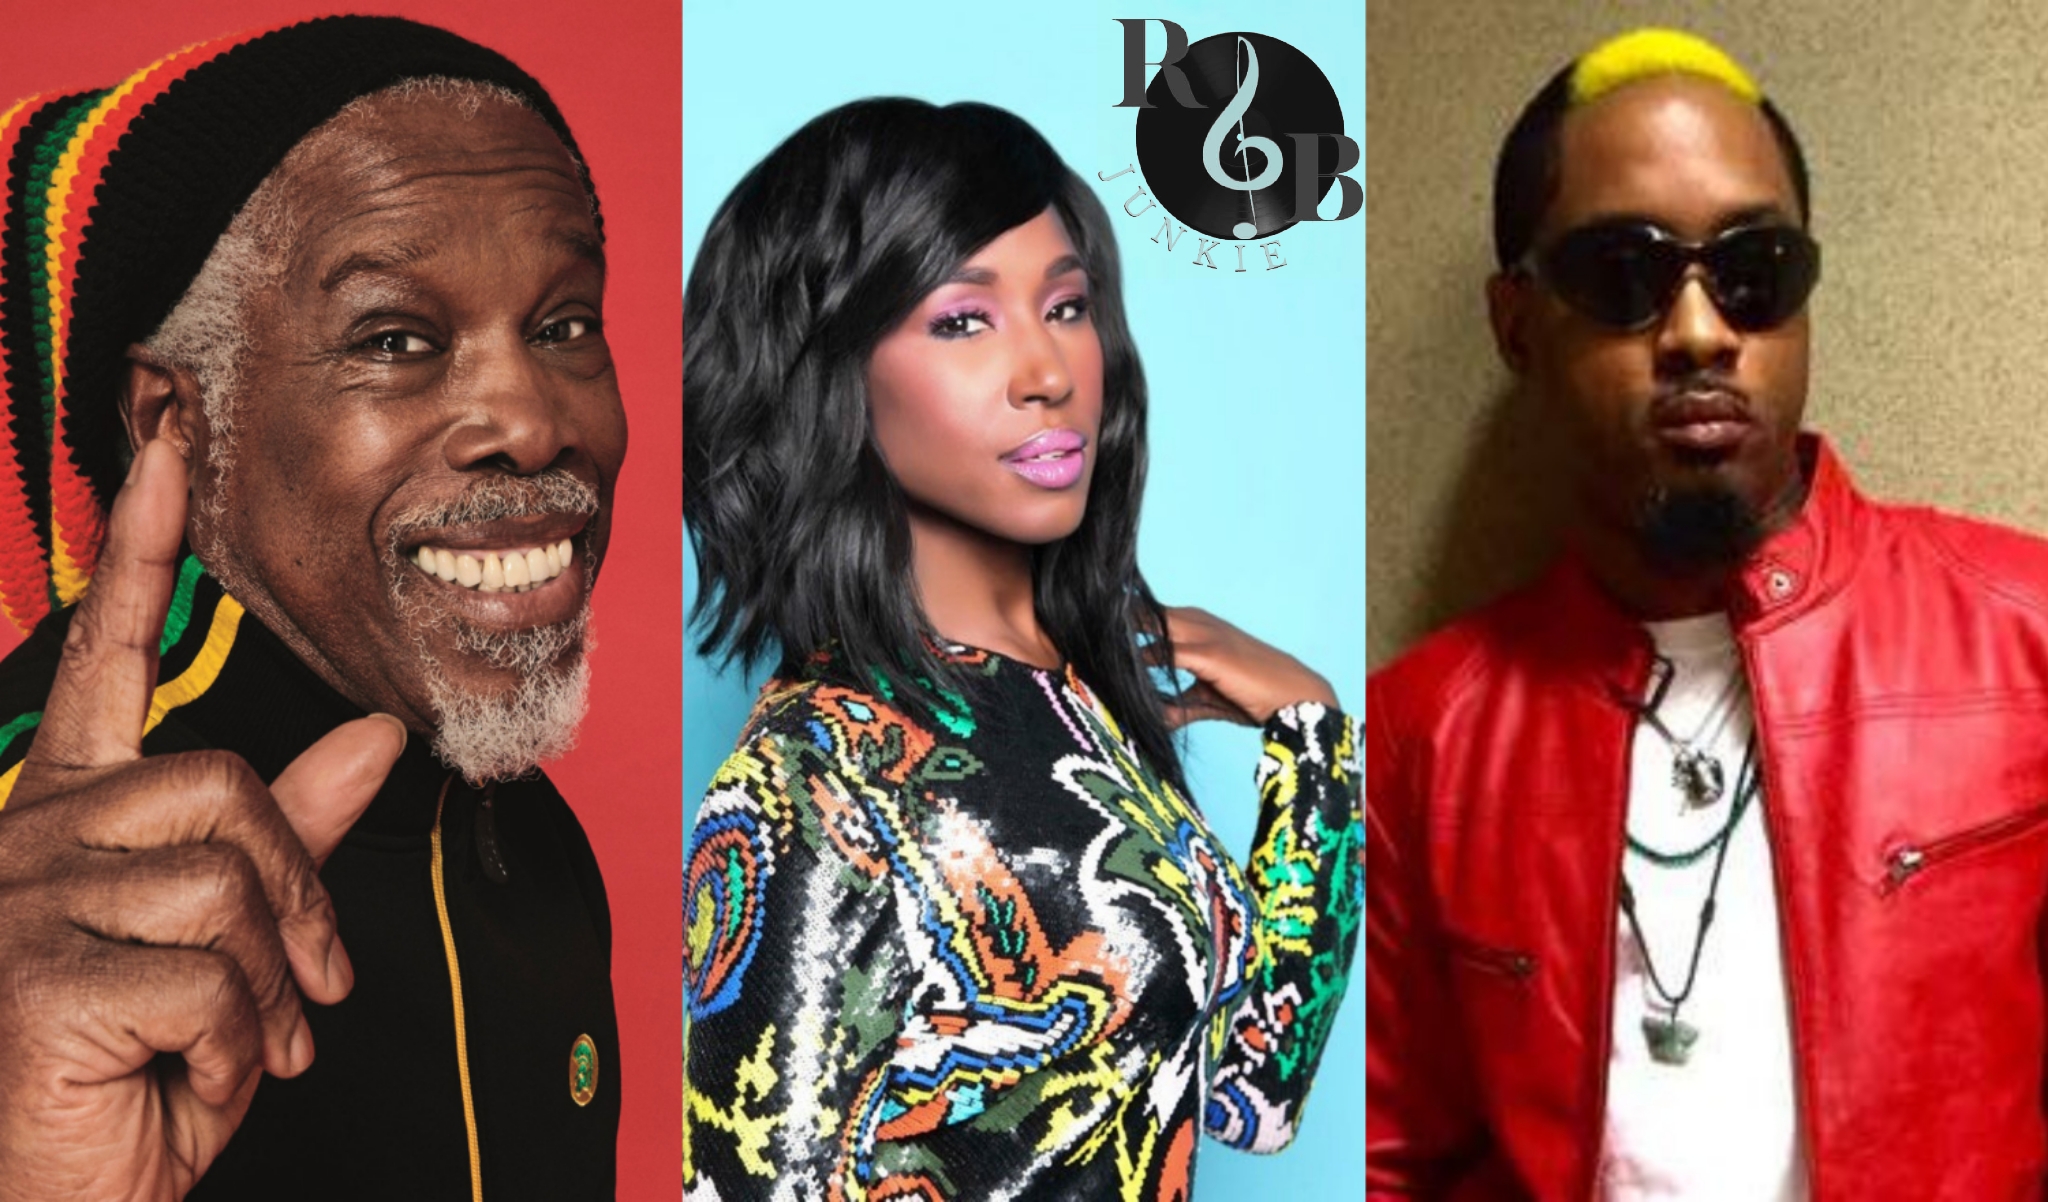 Happy Birthday shout-outs to Billy Ocean, message and Nokio of Dru Hill 